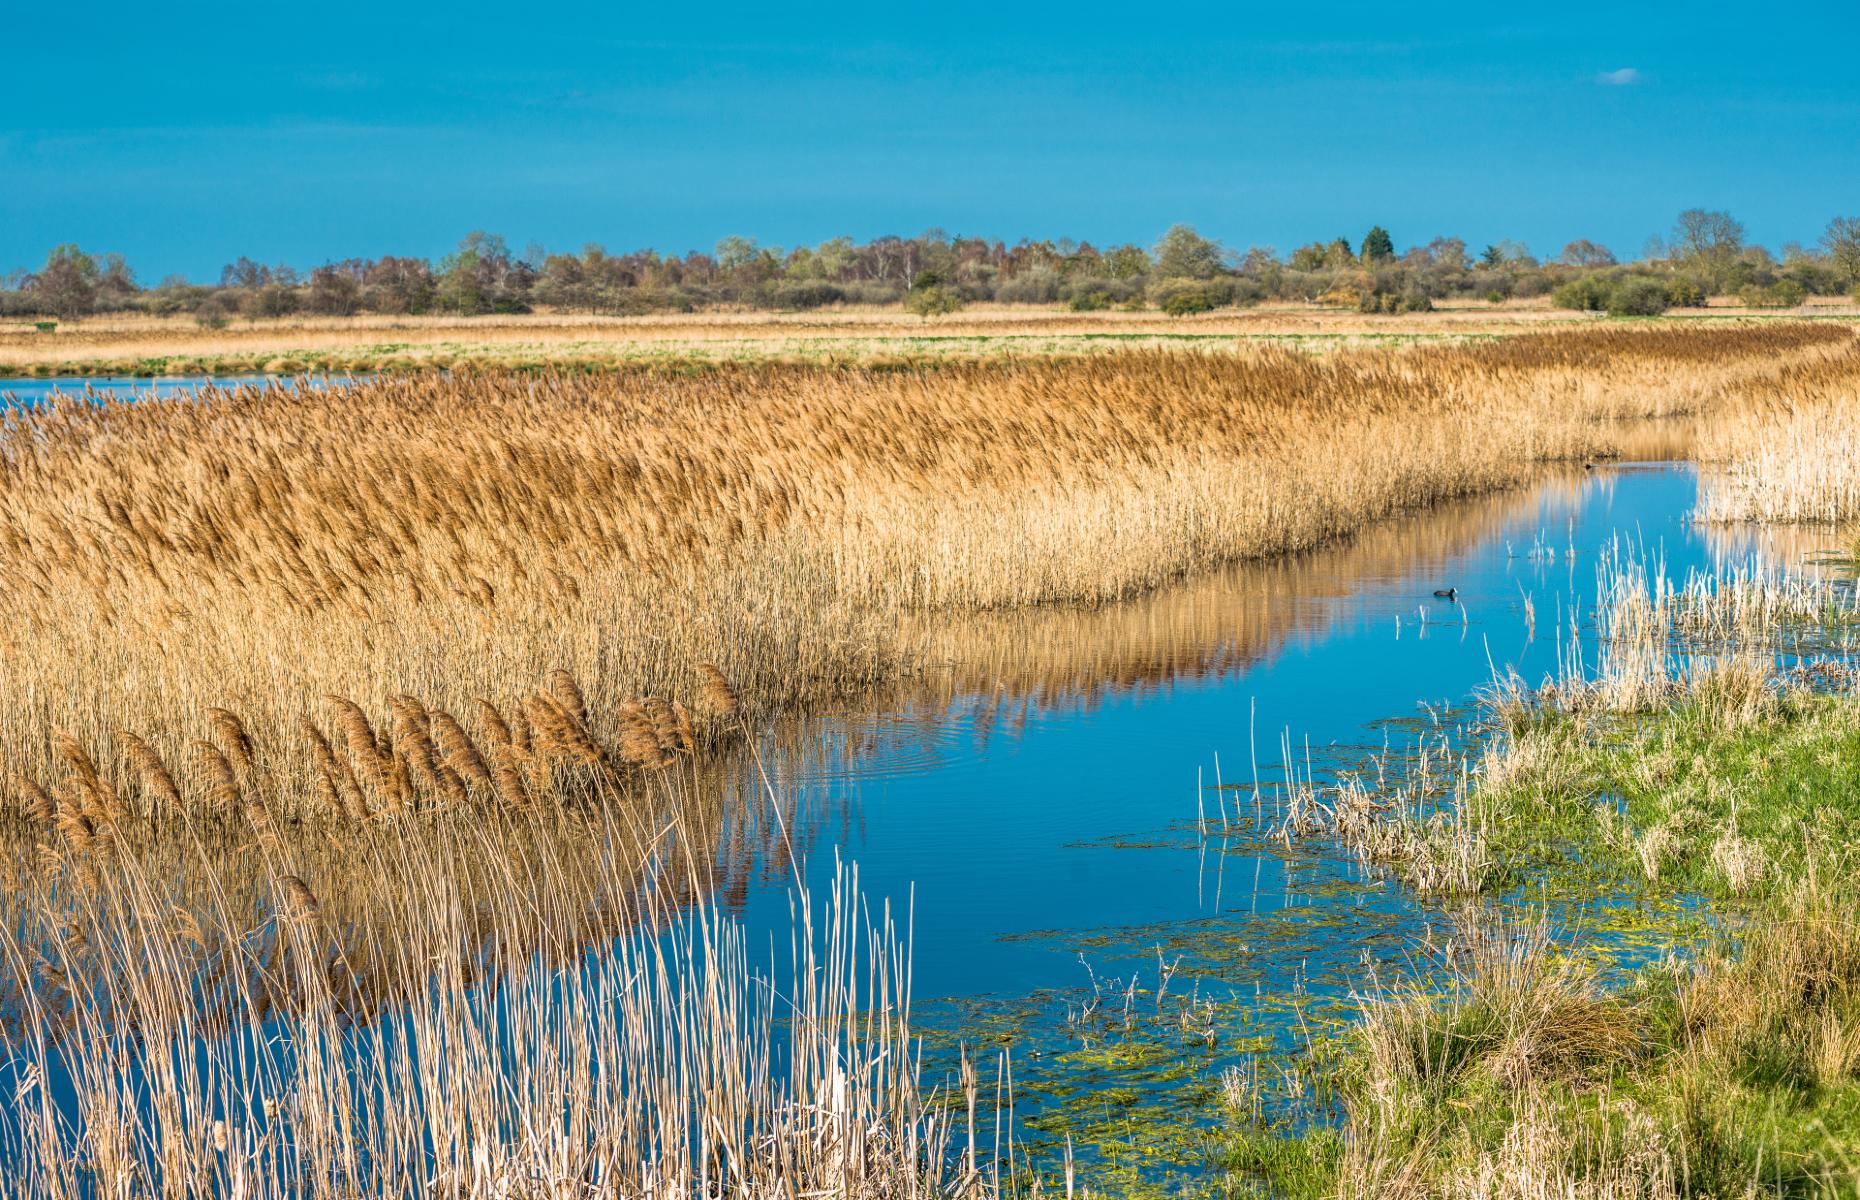 The Fens (Image: Andy333/Shutterstock)